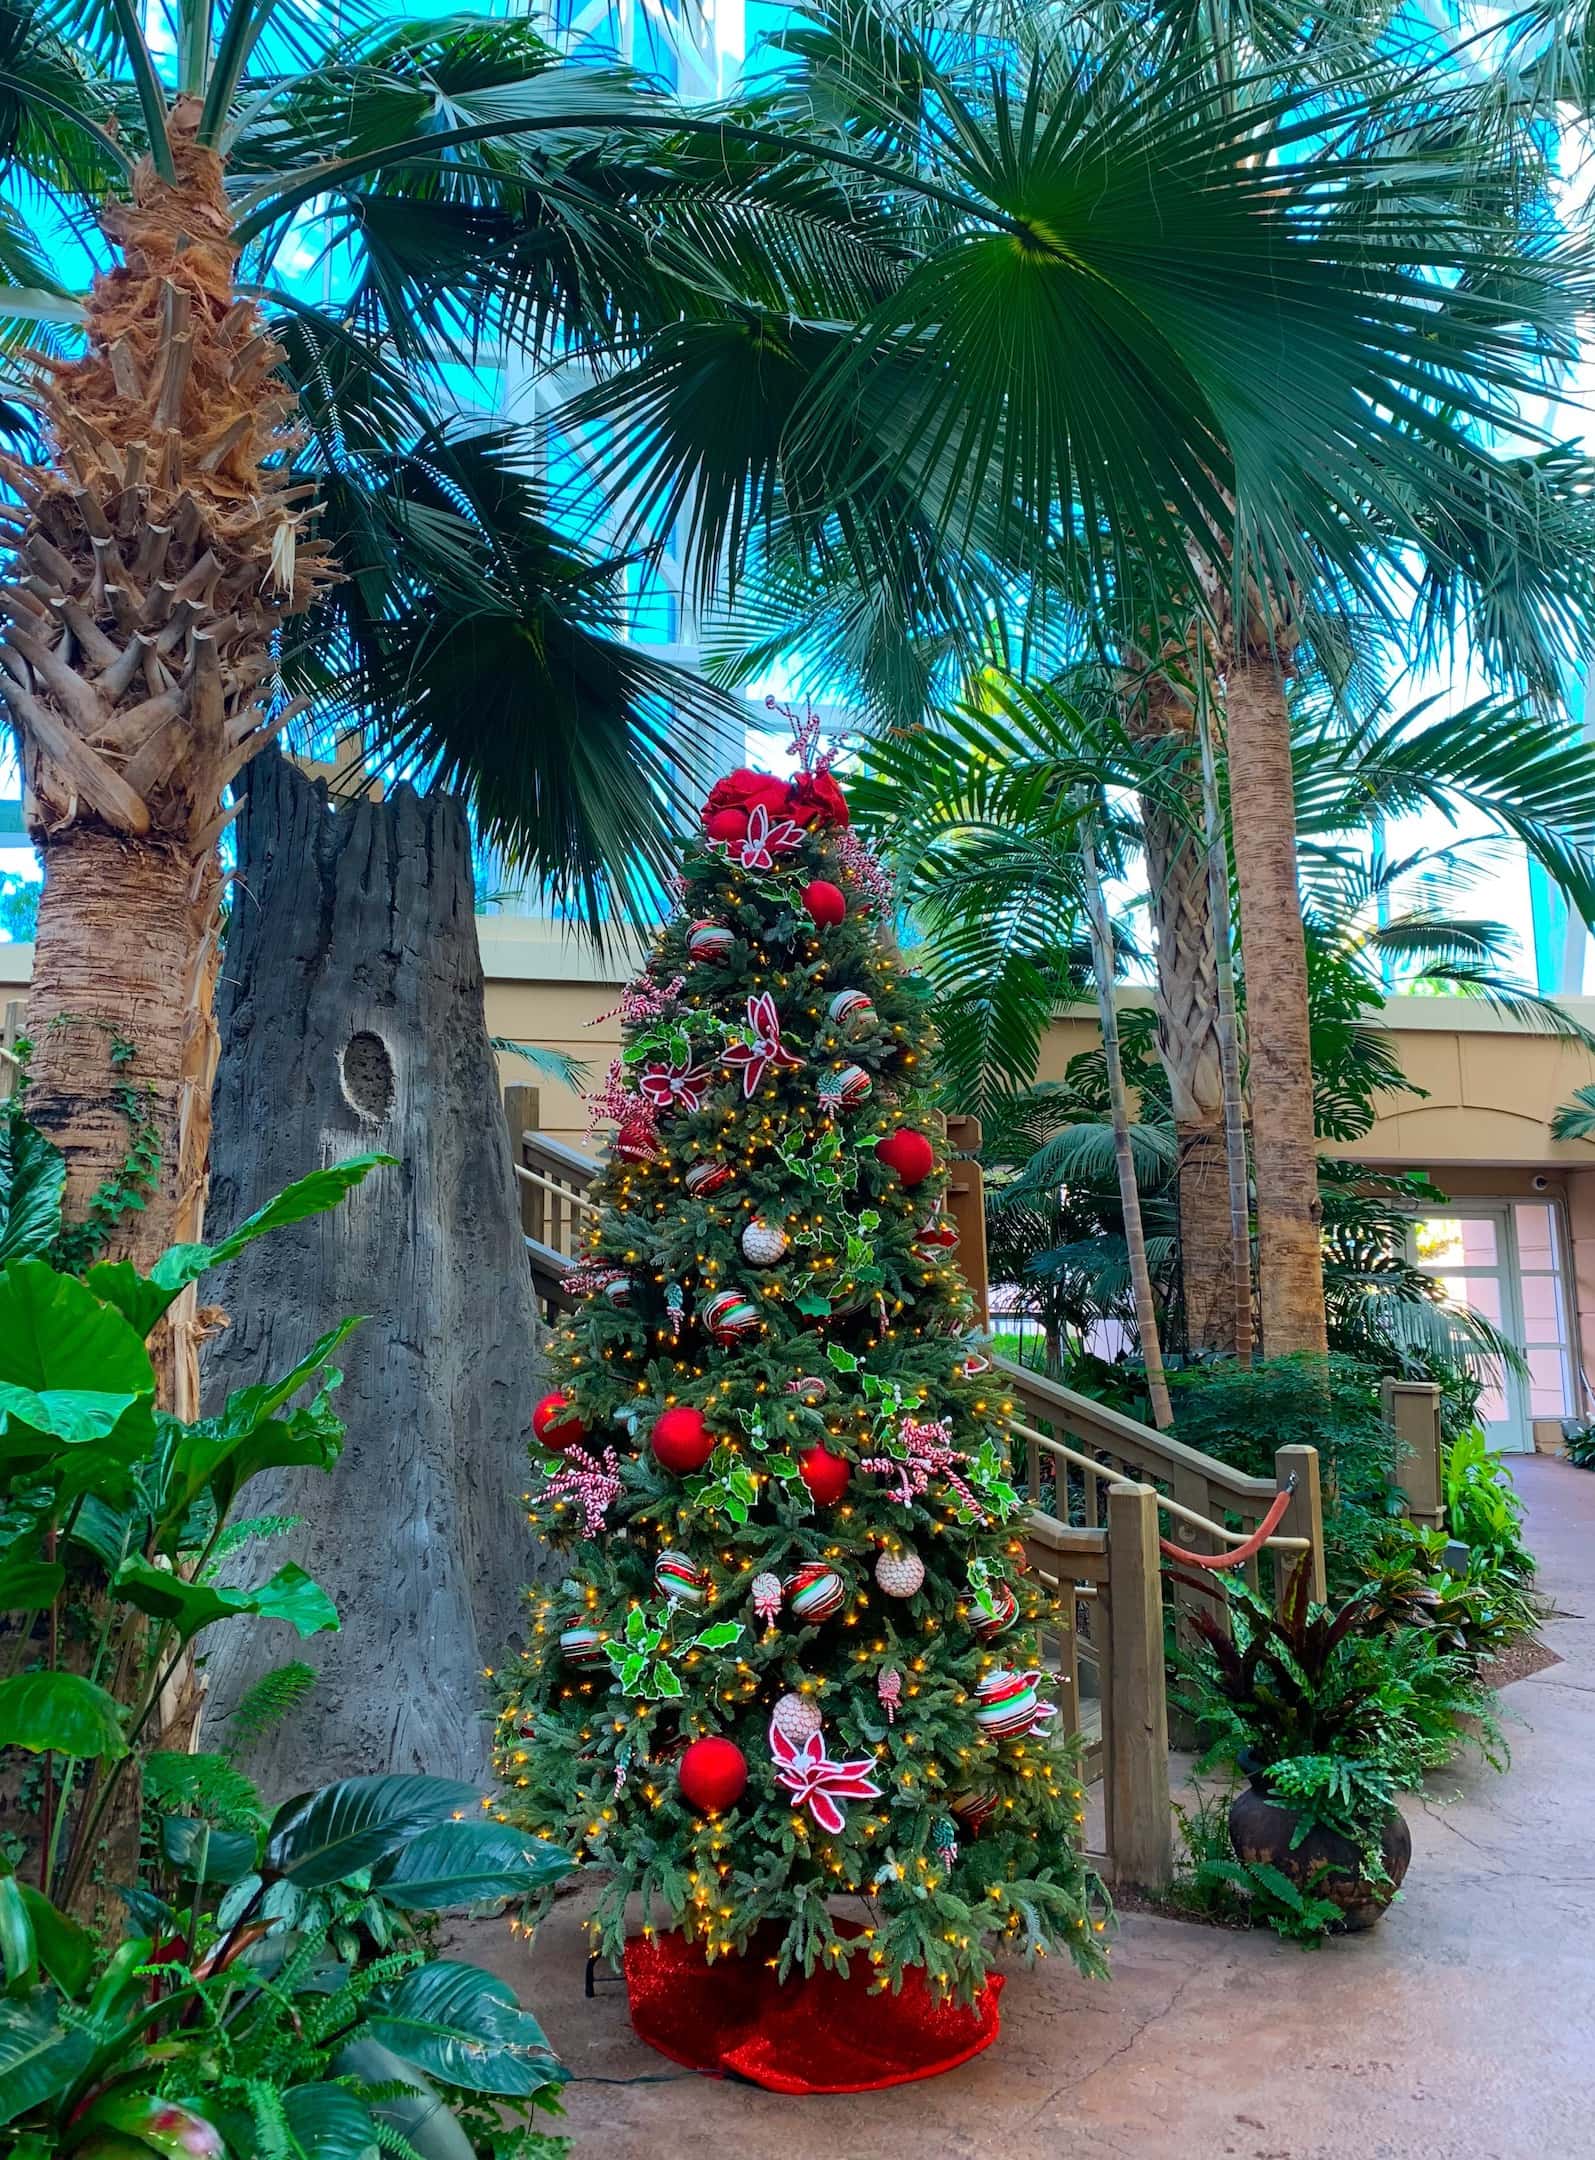 decorated Christmas tree under palm trees Gaylord Palms Christmas Tree trail